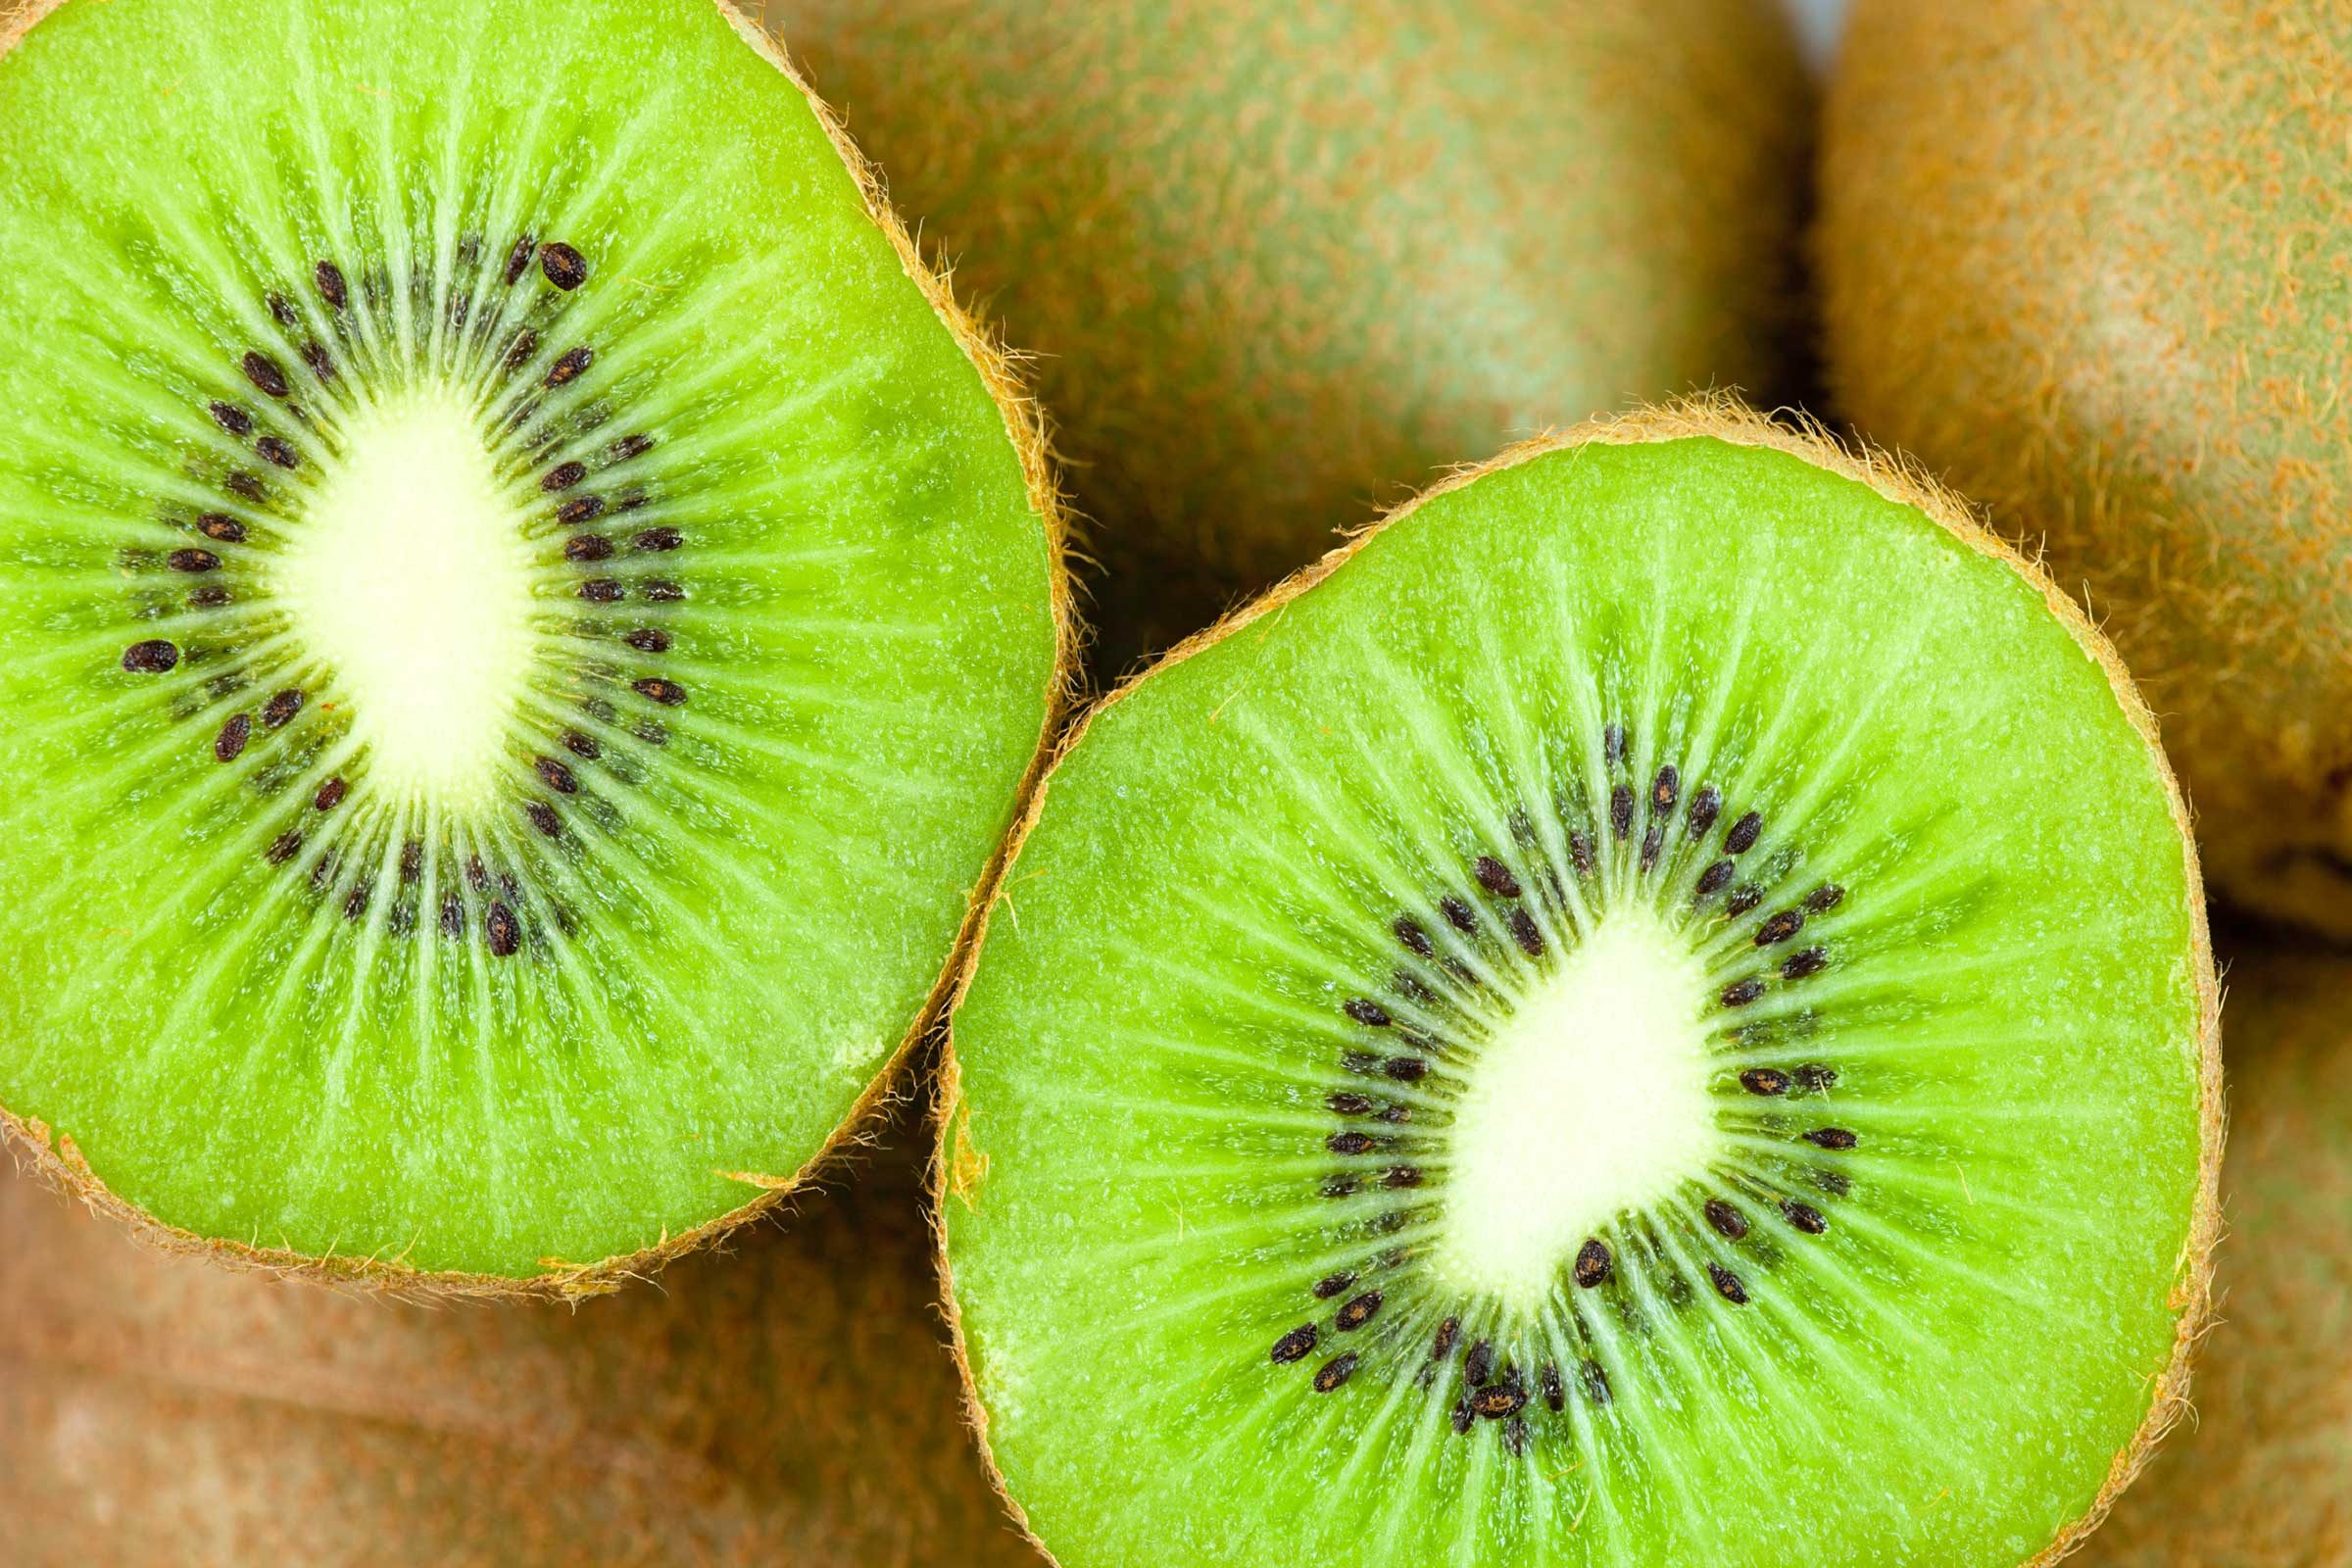 Cut a kiwifruit in half, then scoop out the flesh with a spoon